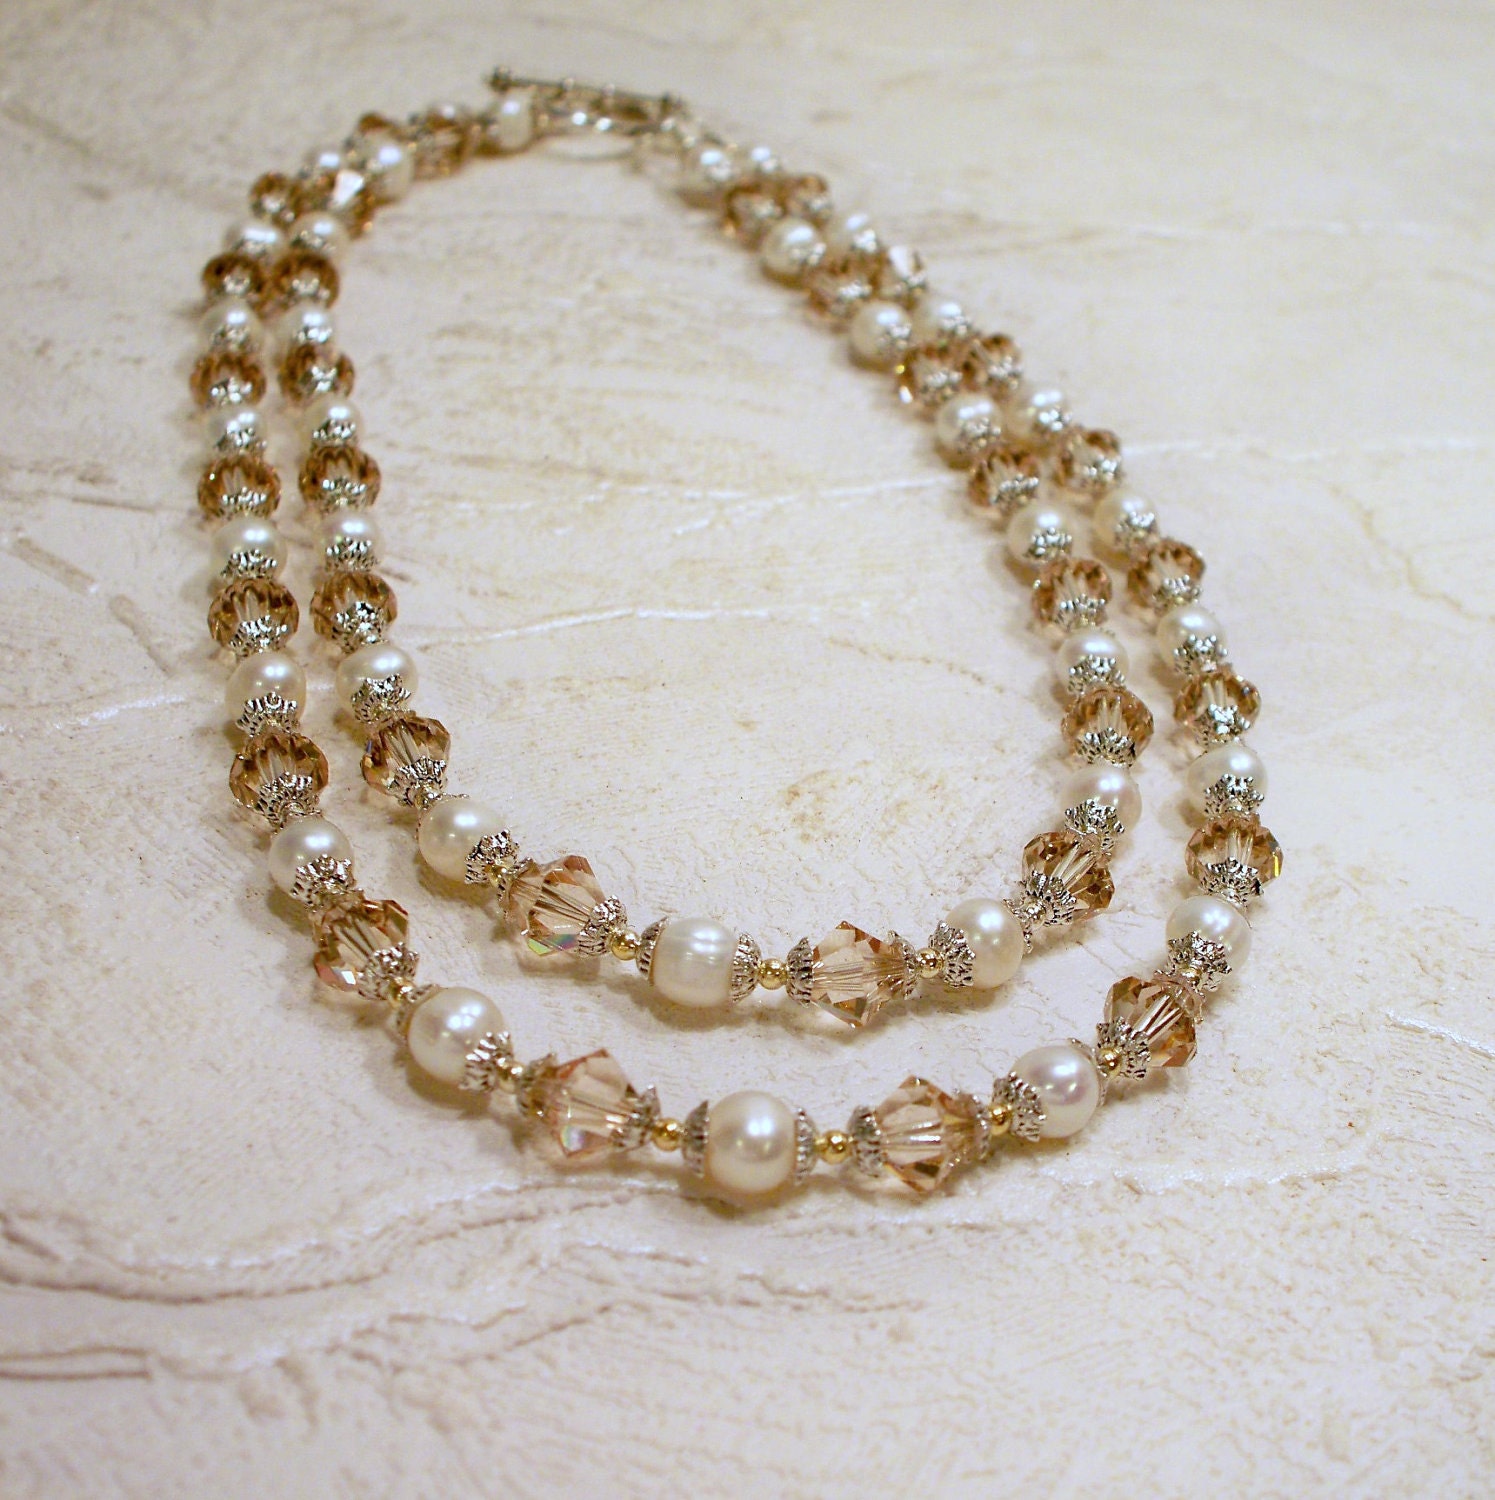 Ceylon Topaz Crystals and Pearl Double Strand Necklace - Etsy